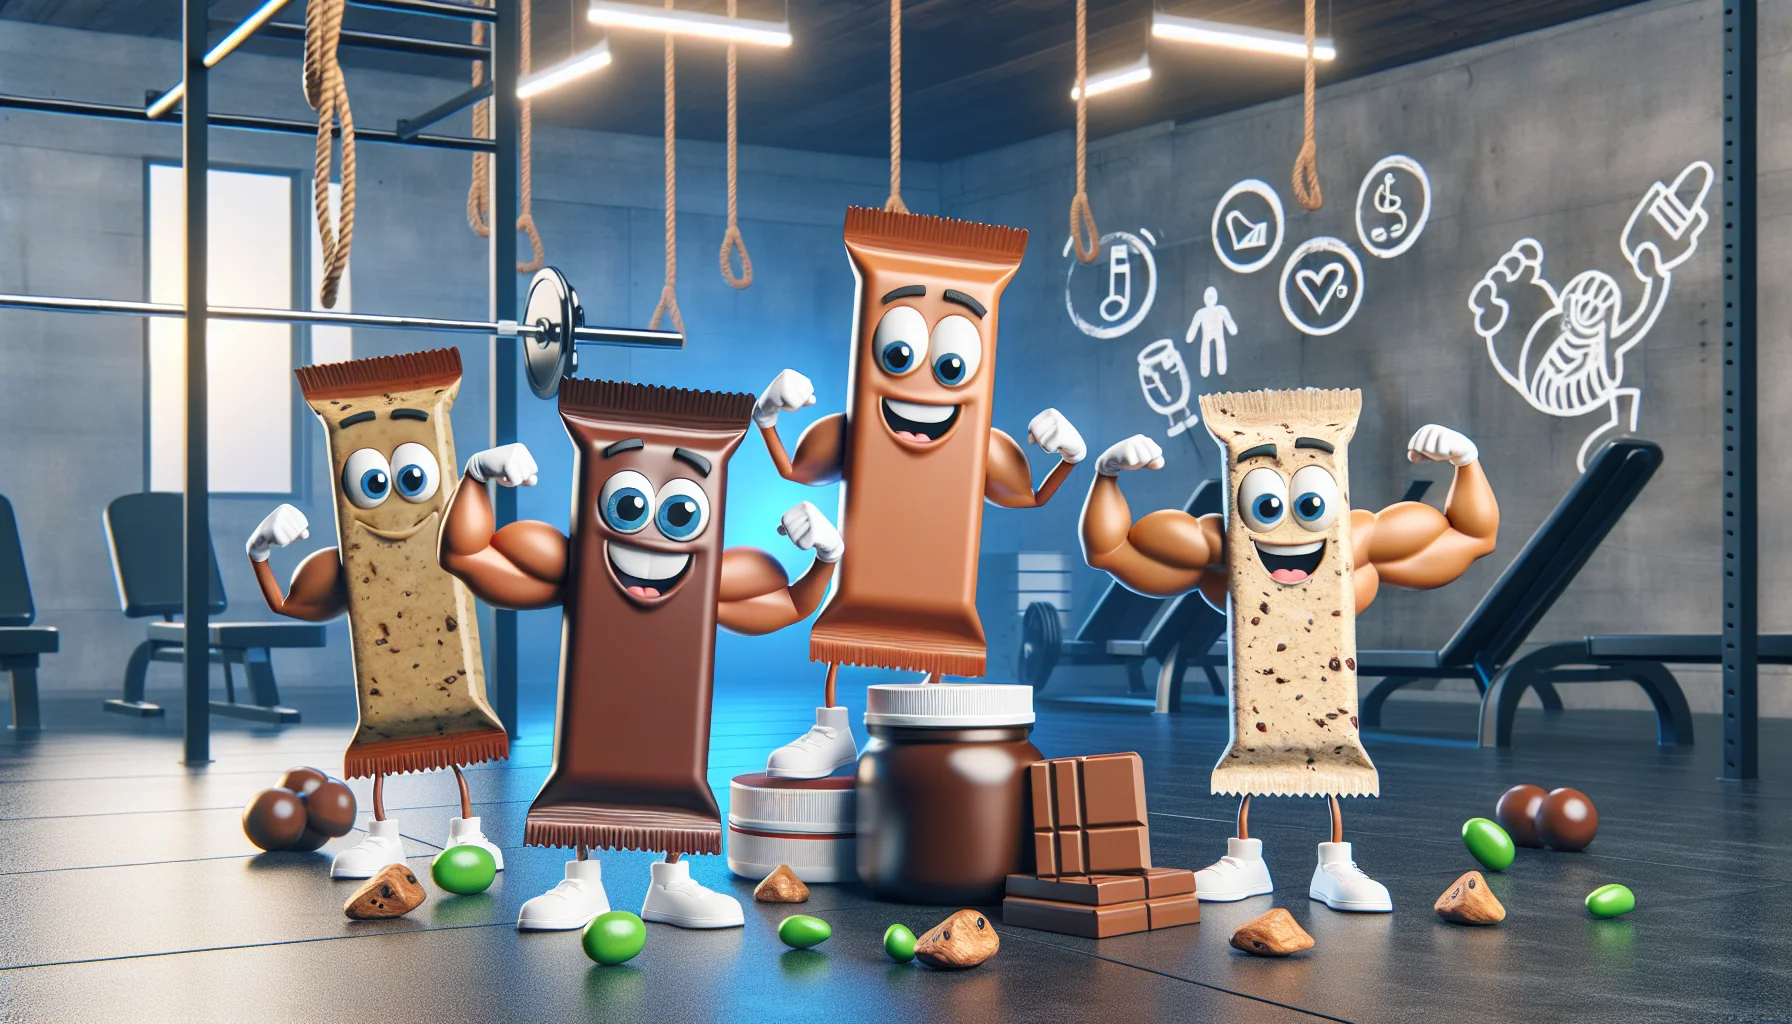 Image of a comedic scene featuring anthropomorphized protein bars in a gym setting. These protein bars have animated features with expressive faces, flexing their 'muscles', portraying they're actively engaging in physical exercise. The bars are of different shapes and sizes, representative of the diversity in flavors. Nearby are symbols or visuals hinting at the benefits of sports supplements - like energy sparks, strength icons, and health symbols. The environment should elicit a friendly and inviting atmosphere while simultaneously encouraging viewers towards fitness and the use of supplements.